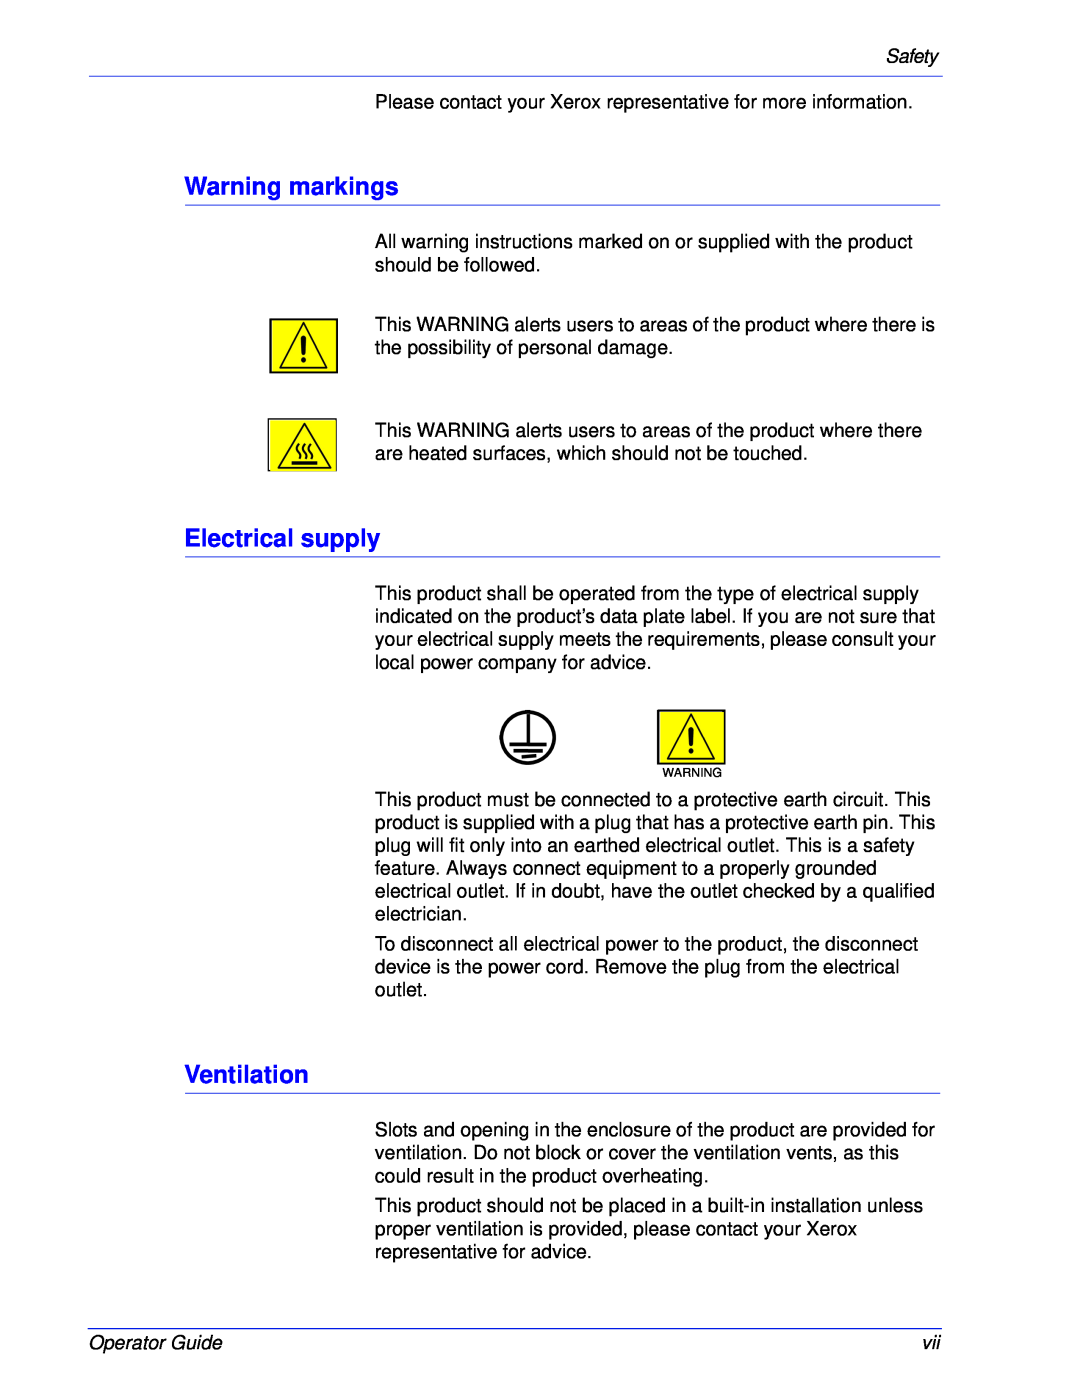 Xerox 180 EPS, 100 manual Warning markings, Electrical supply, Ventilation, Safety, Operator Guide 